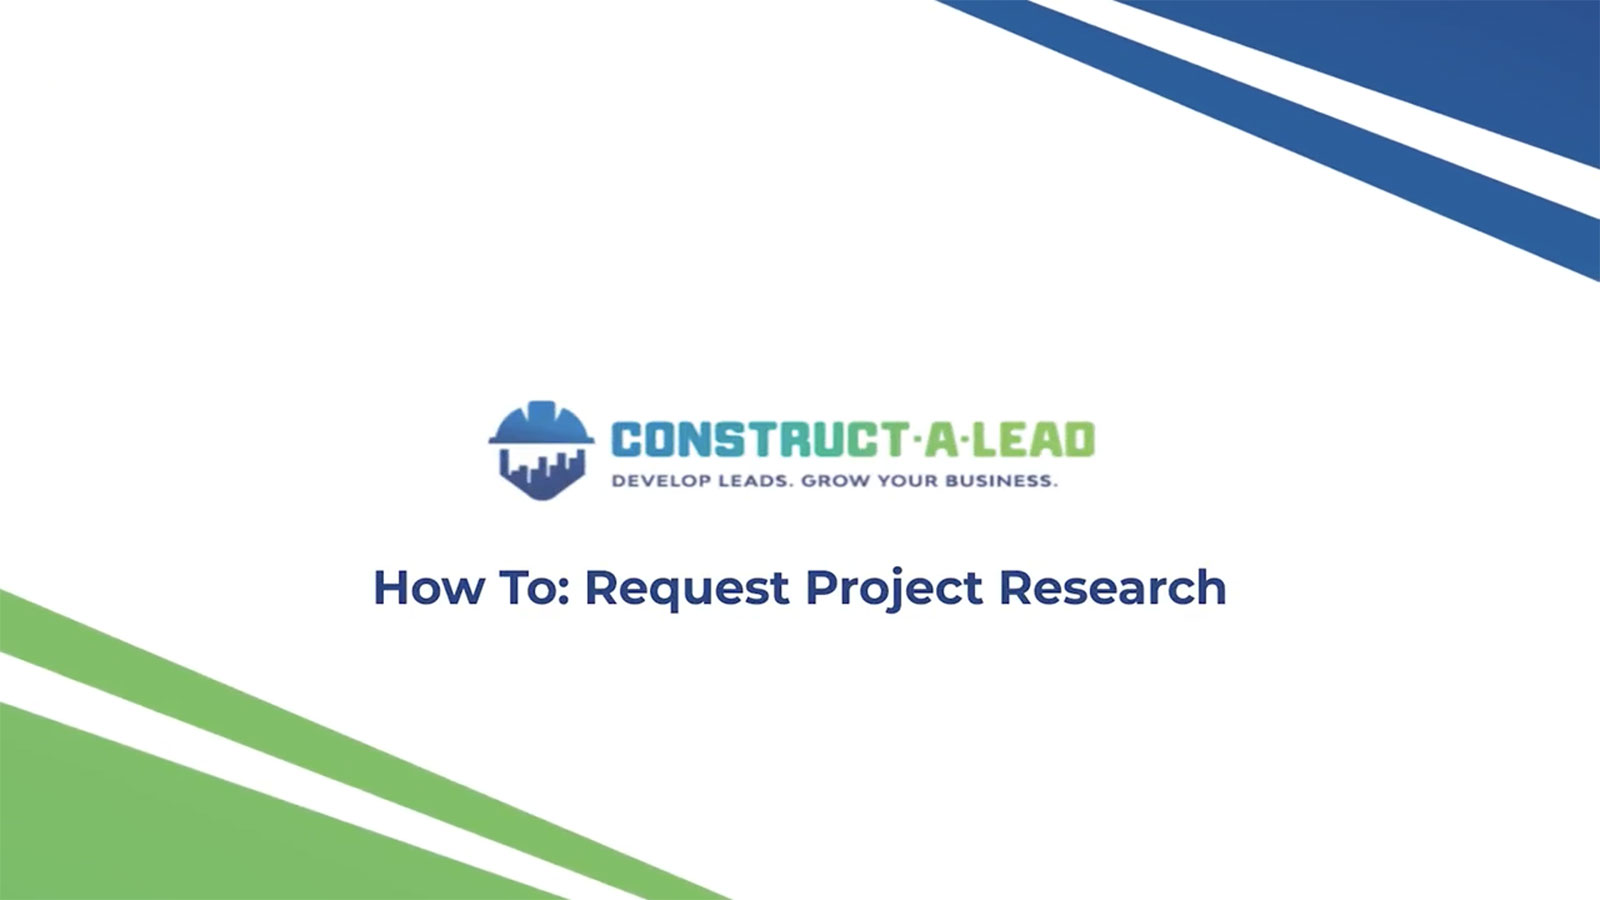 How to request project research video thumbnail.